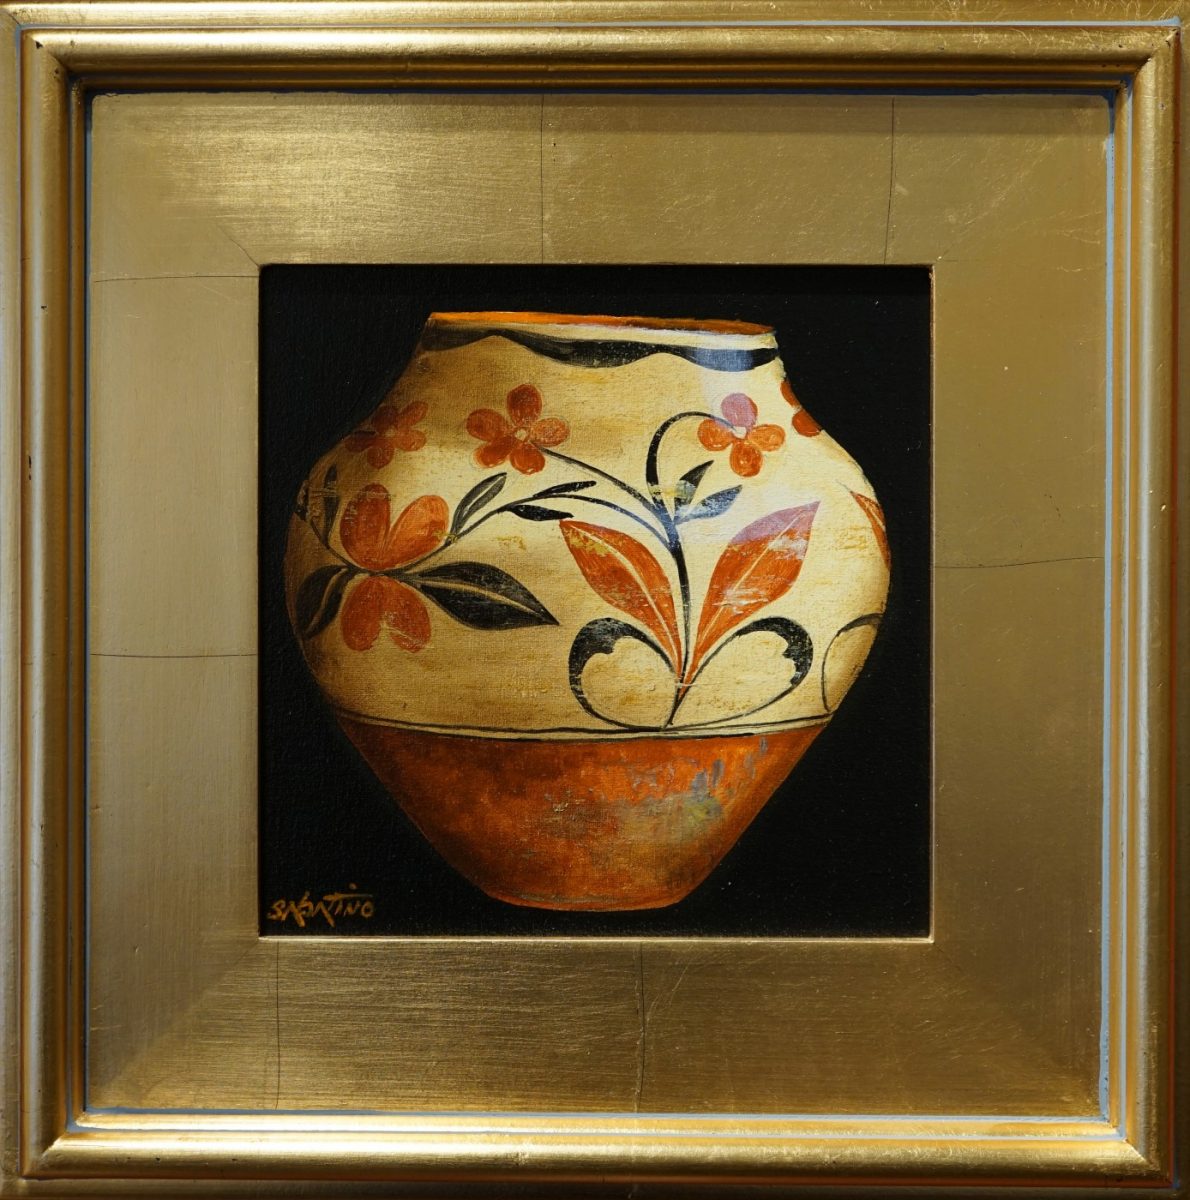 Oil painting of Native American pottery by Chuck Sabatino